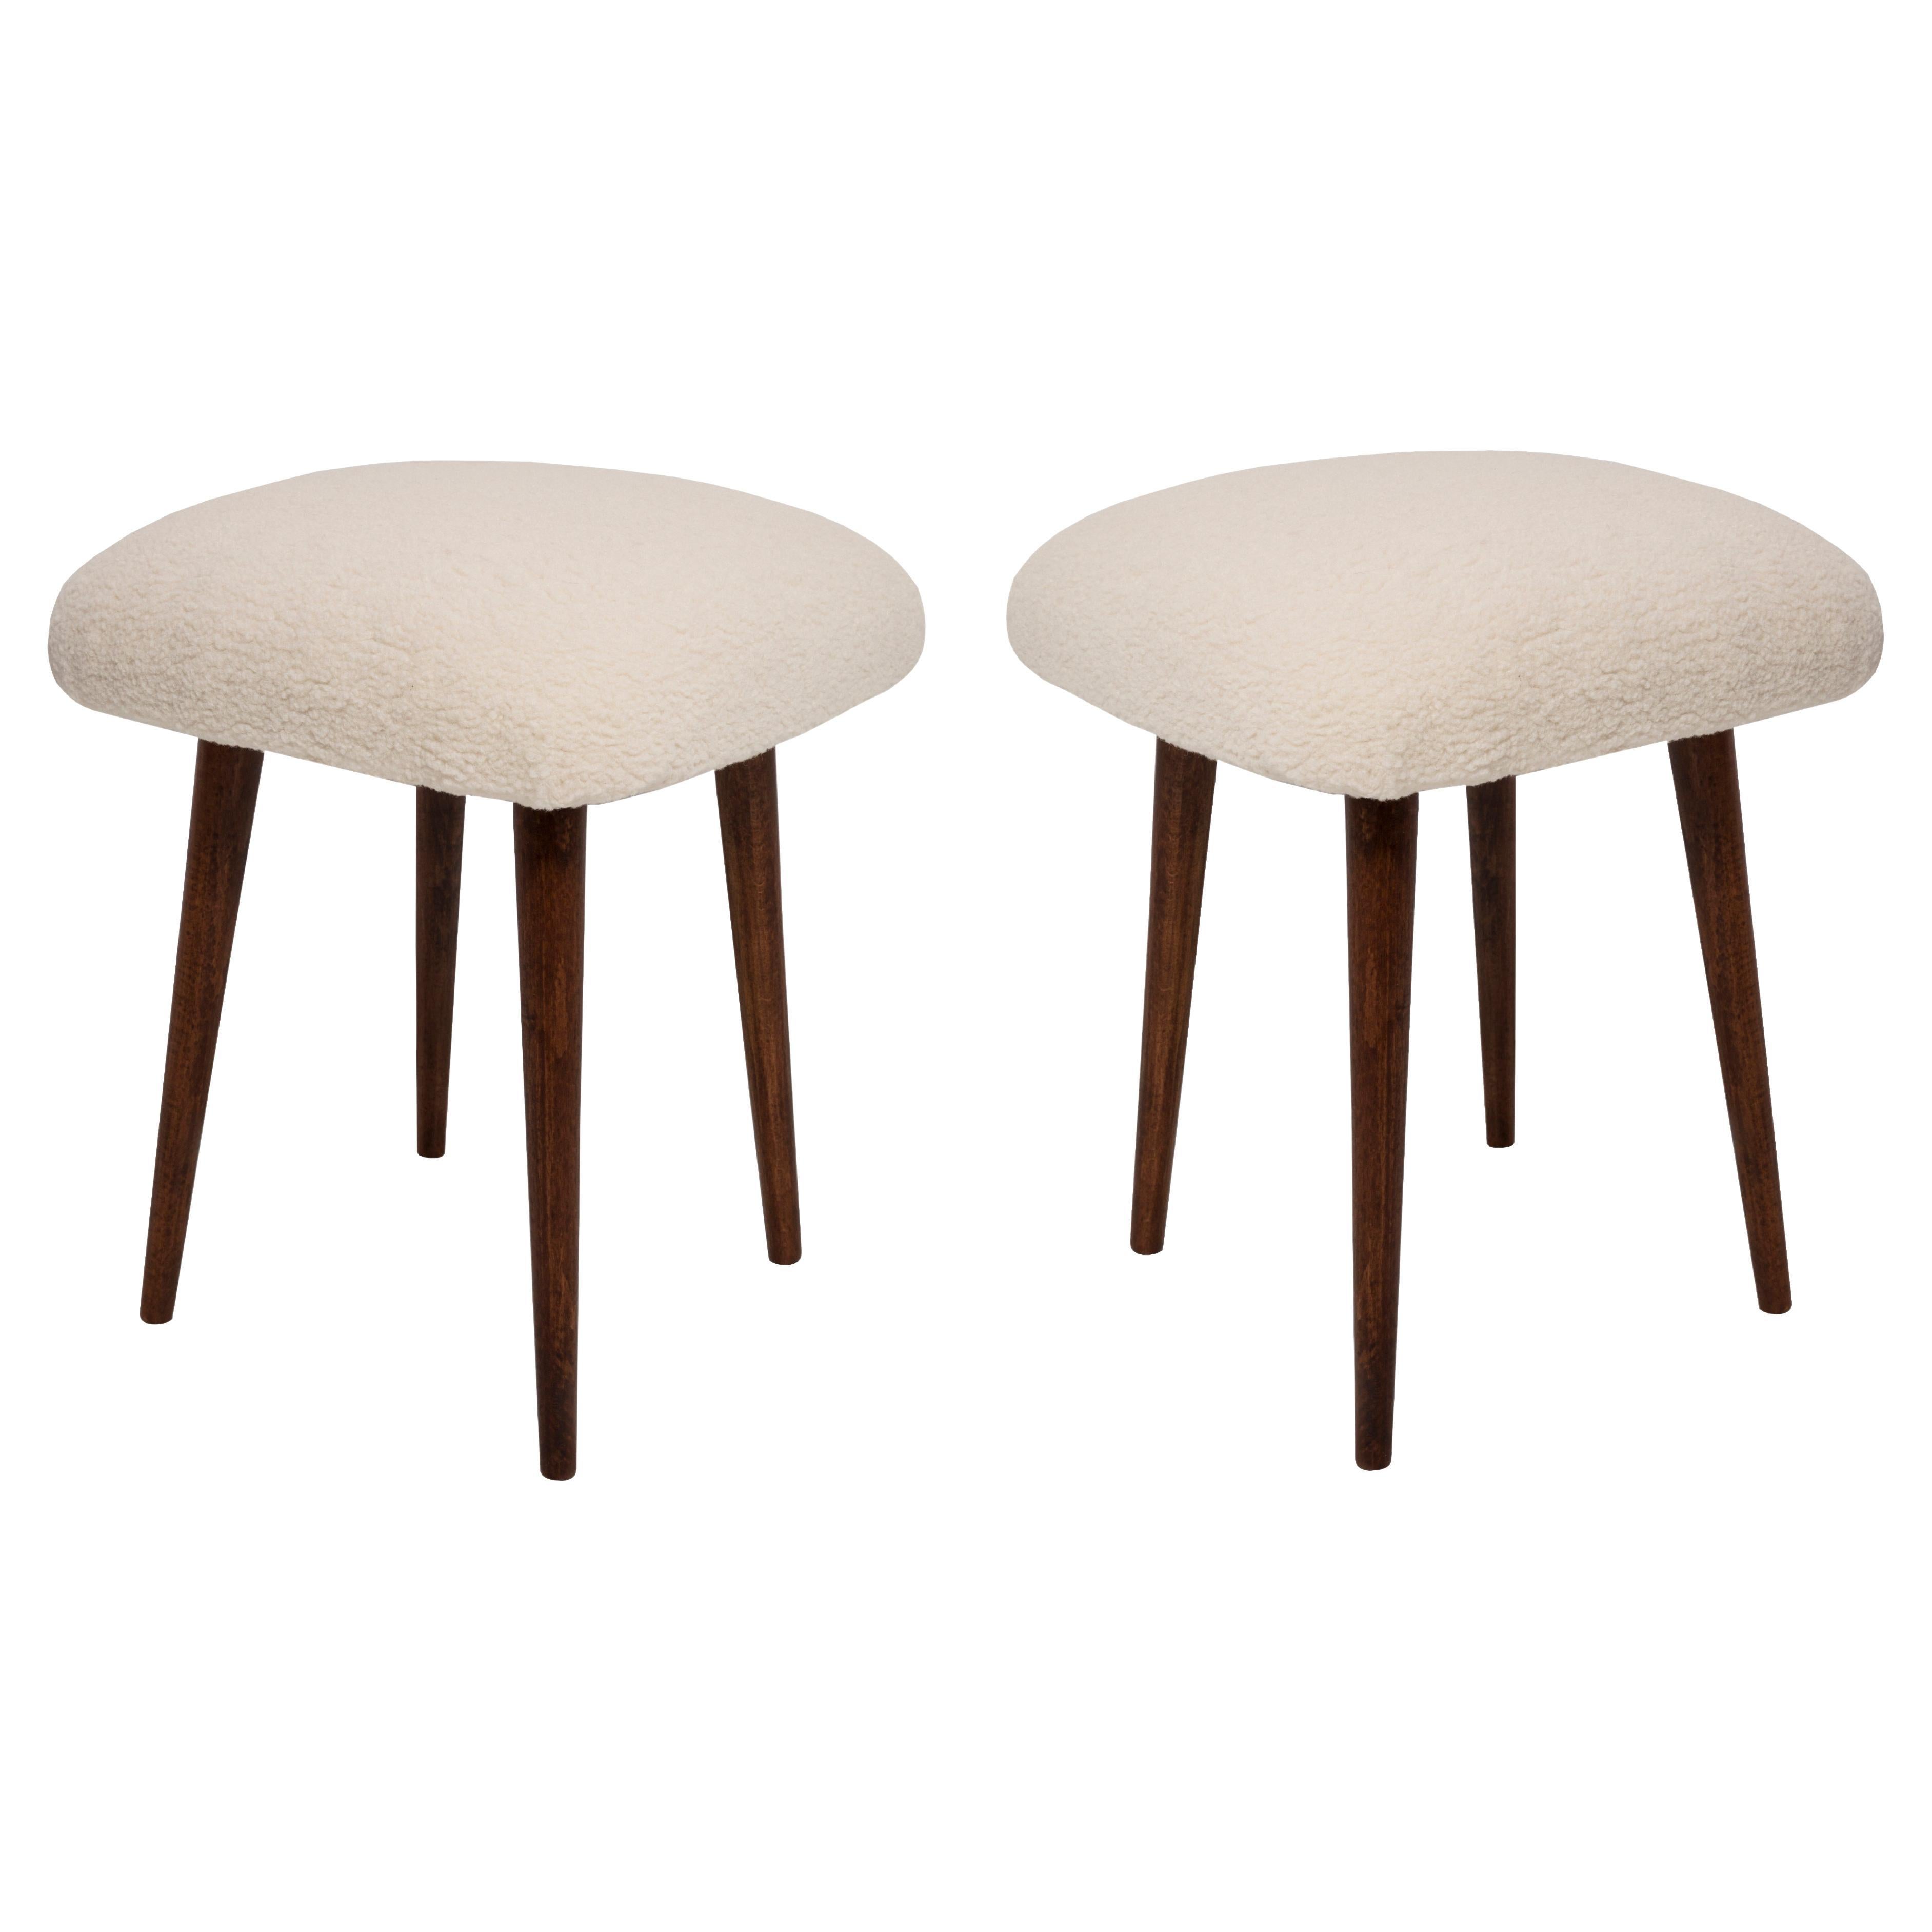 Set of Two Mid-Century Modern Light Beige Boucle Stool, Europe, 1960s For Sale